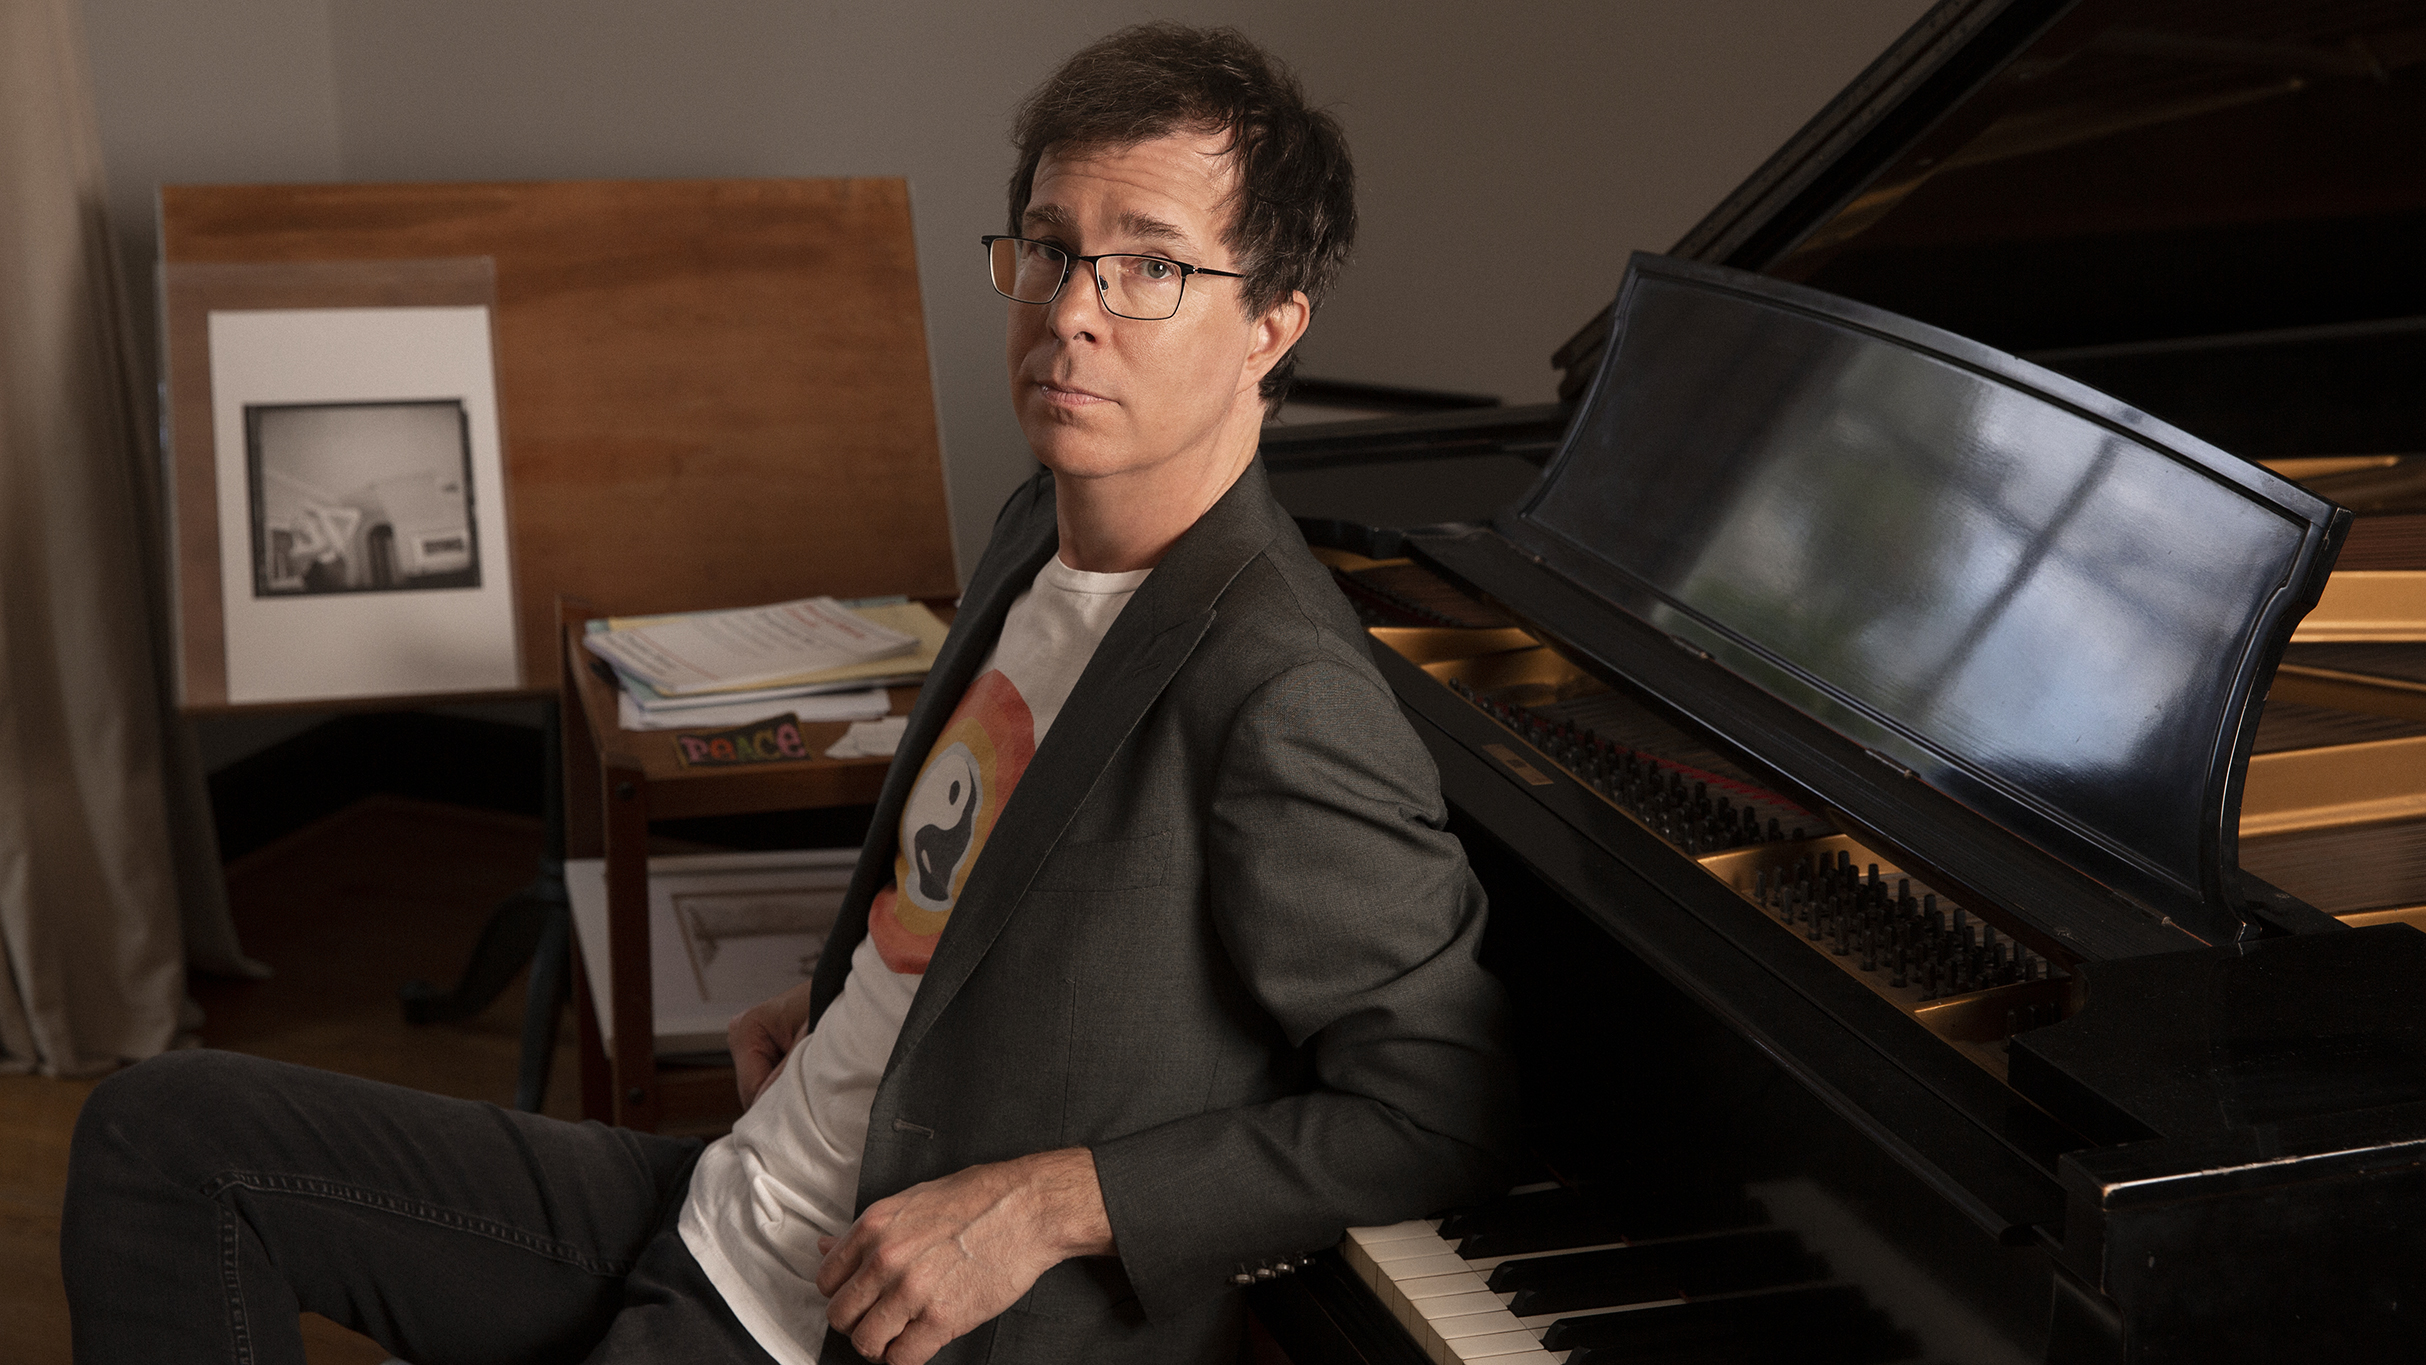 Ben Folds - Paper Airplane Request Tour